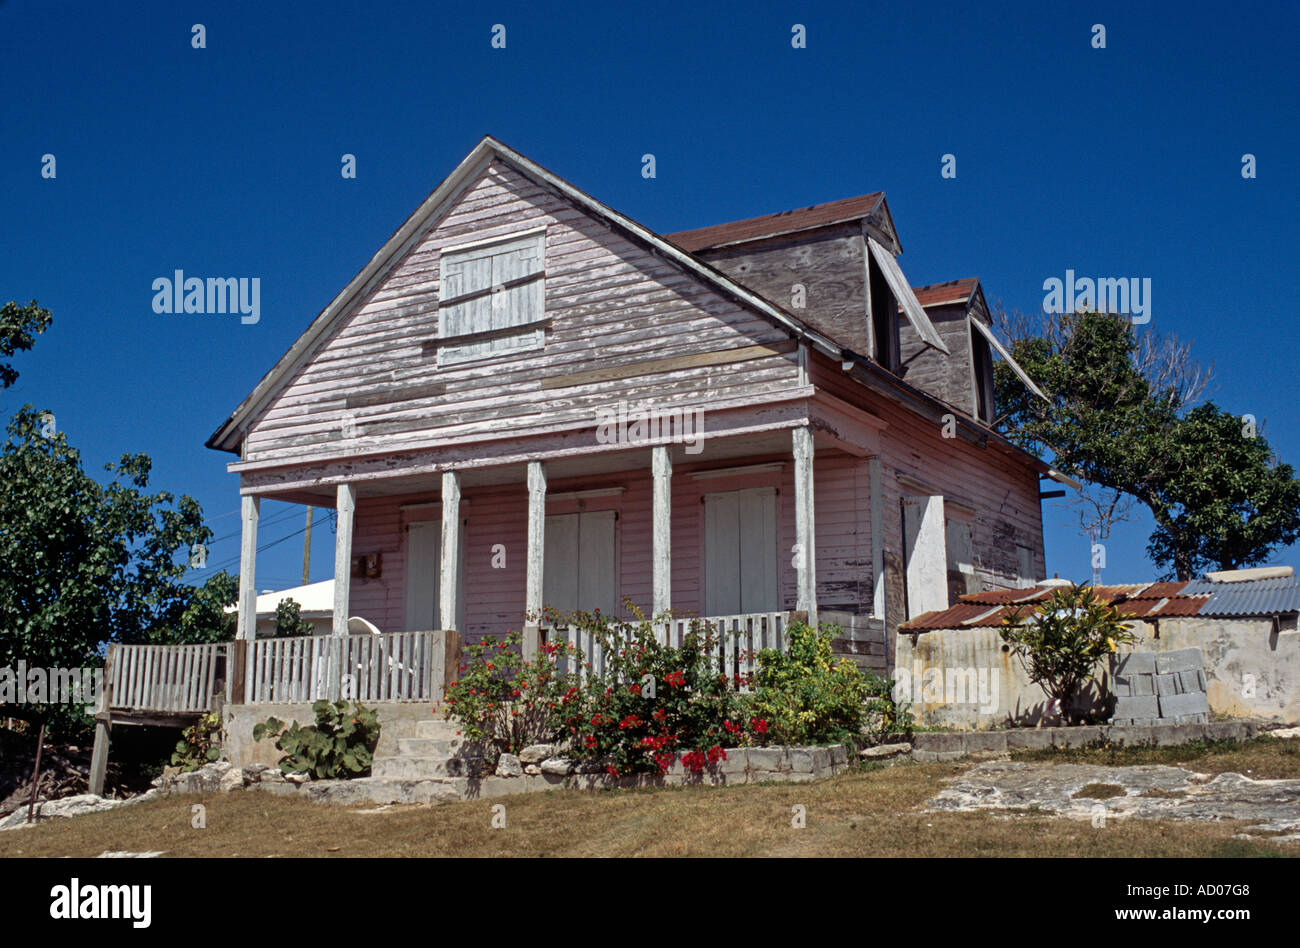 Typical vernacular style home in Governors Harbour Eleuthera Bahamas Stock Photo